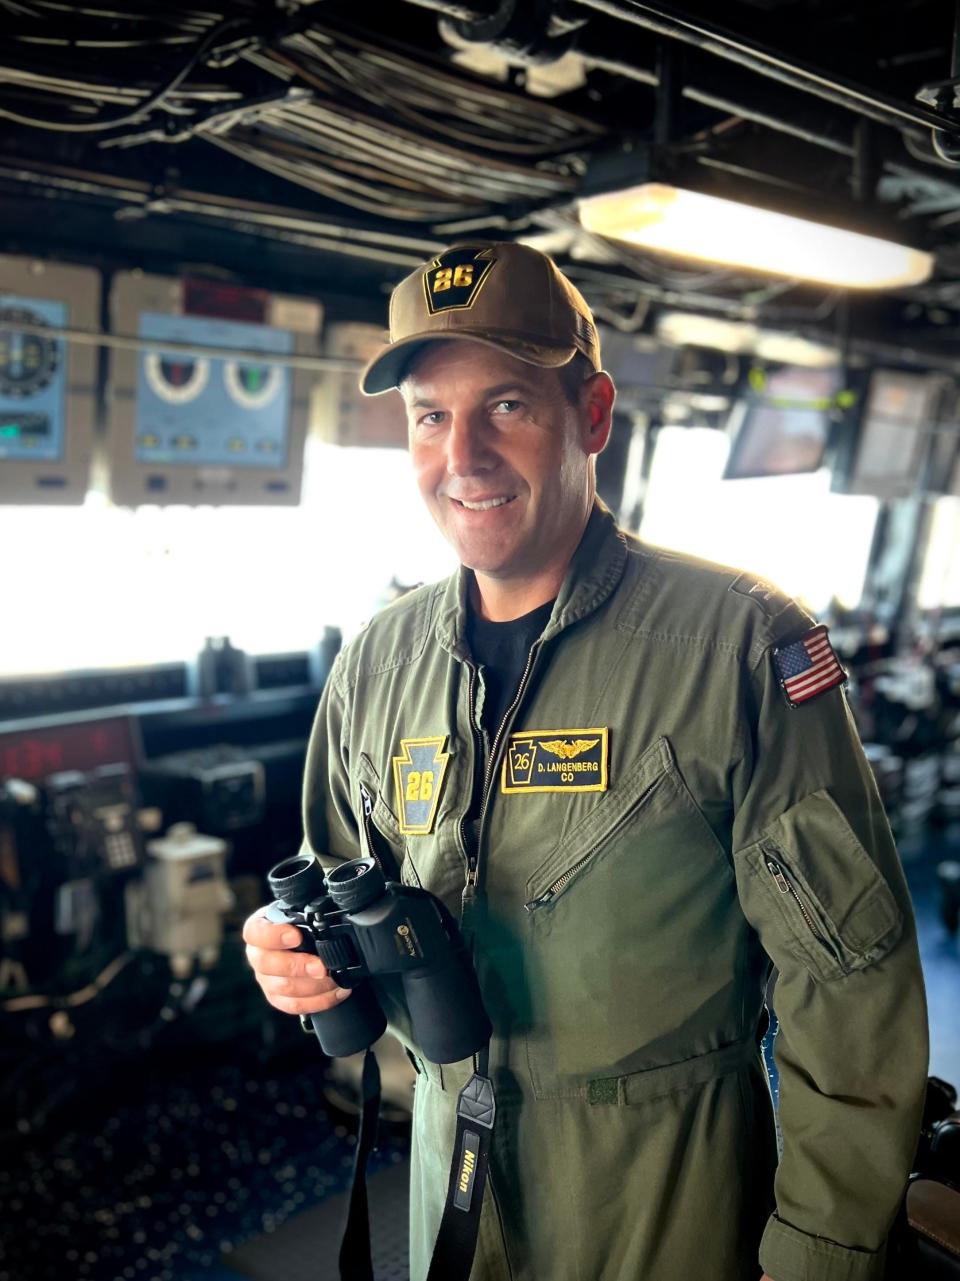 Doug Langenberg is a native of Lone Tree and a U.S. Navy captain based in San Diego.